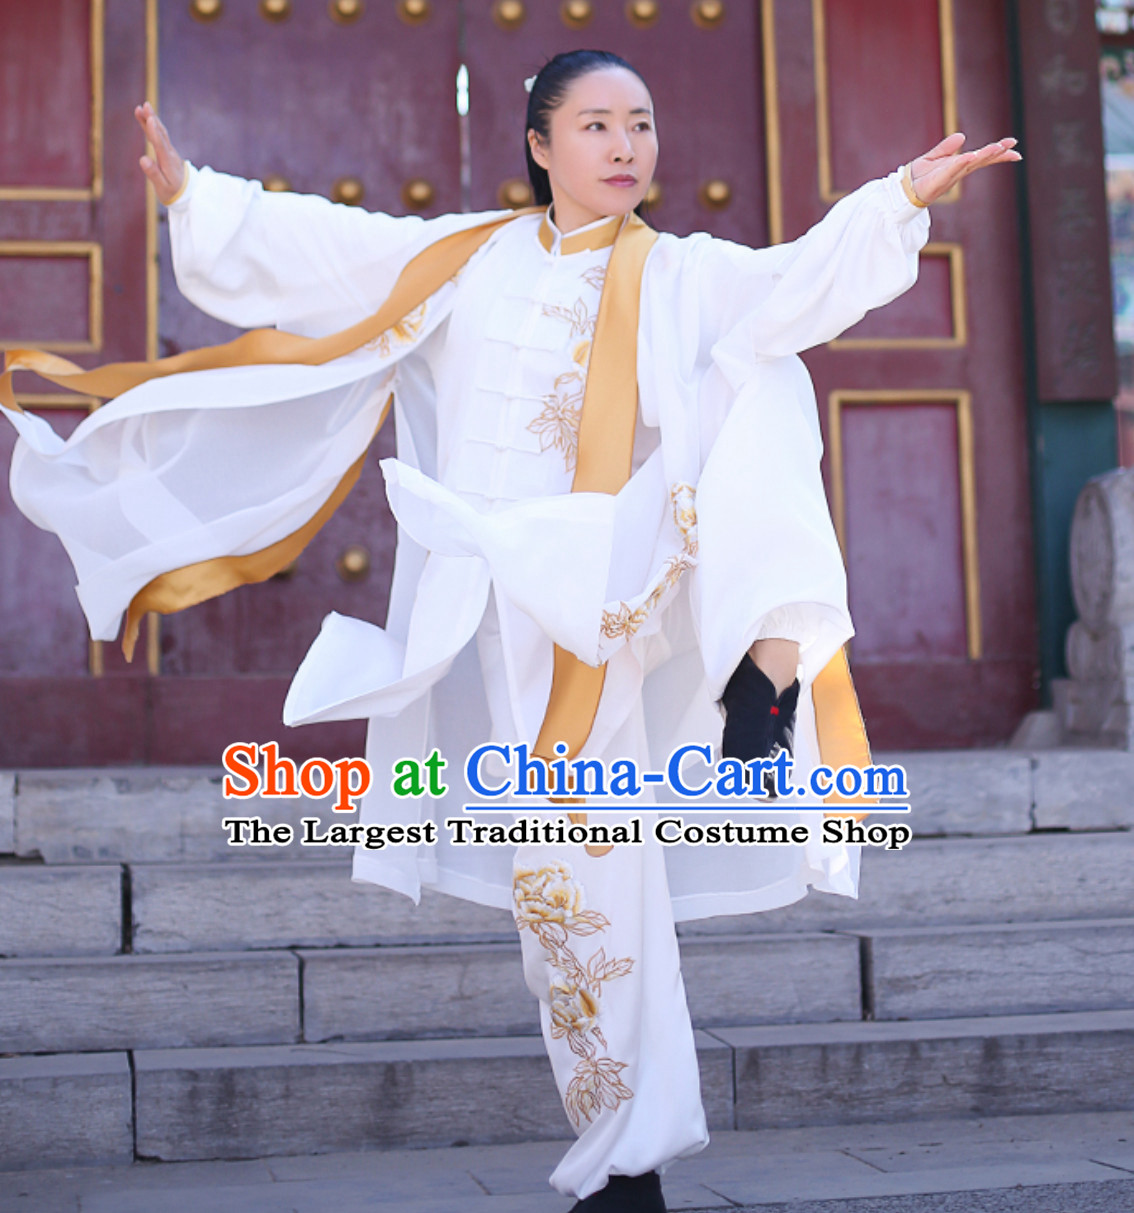 Top Chinese Traditional Competition Championship Tai Chi Taiji Kung Fu Wing Chun Shaolin Master Suits Dresses Complete Set